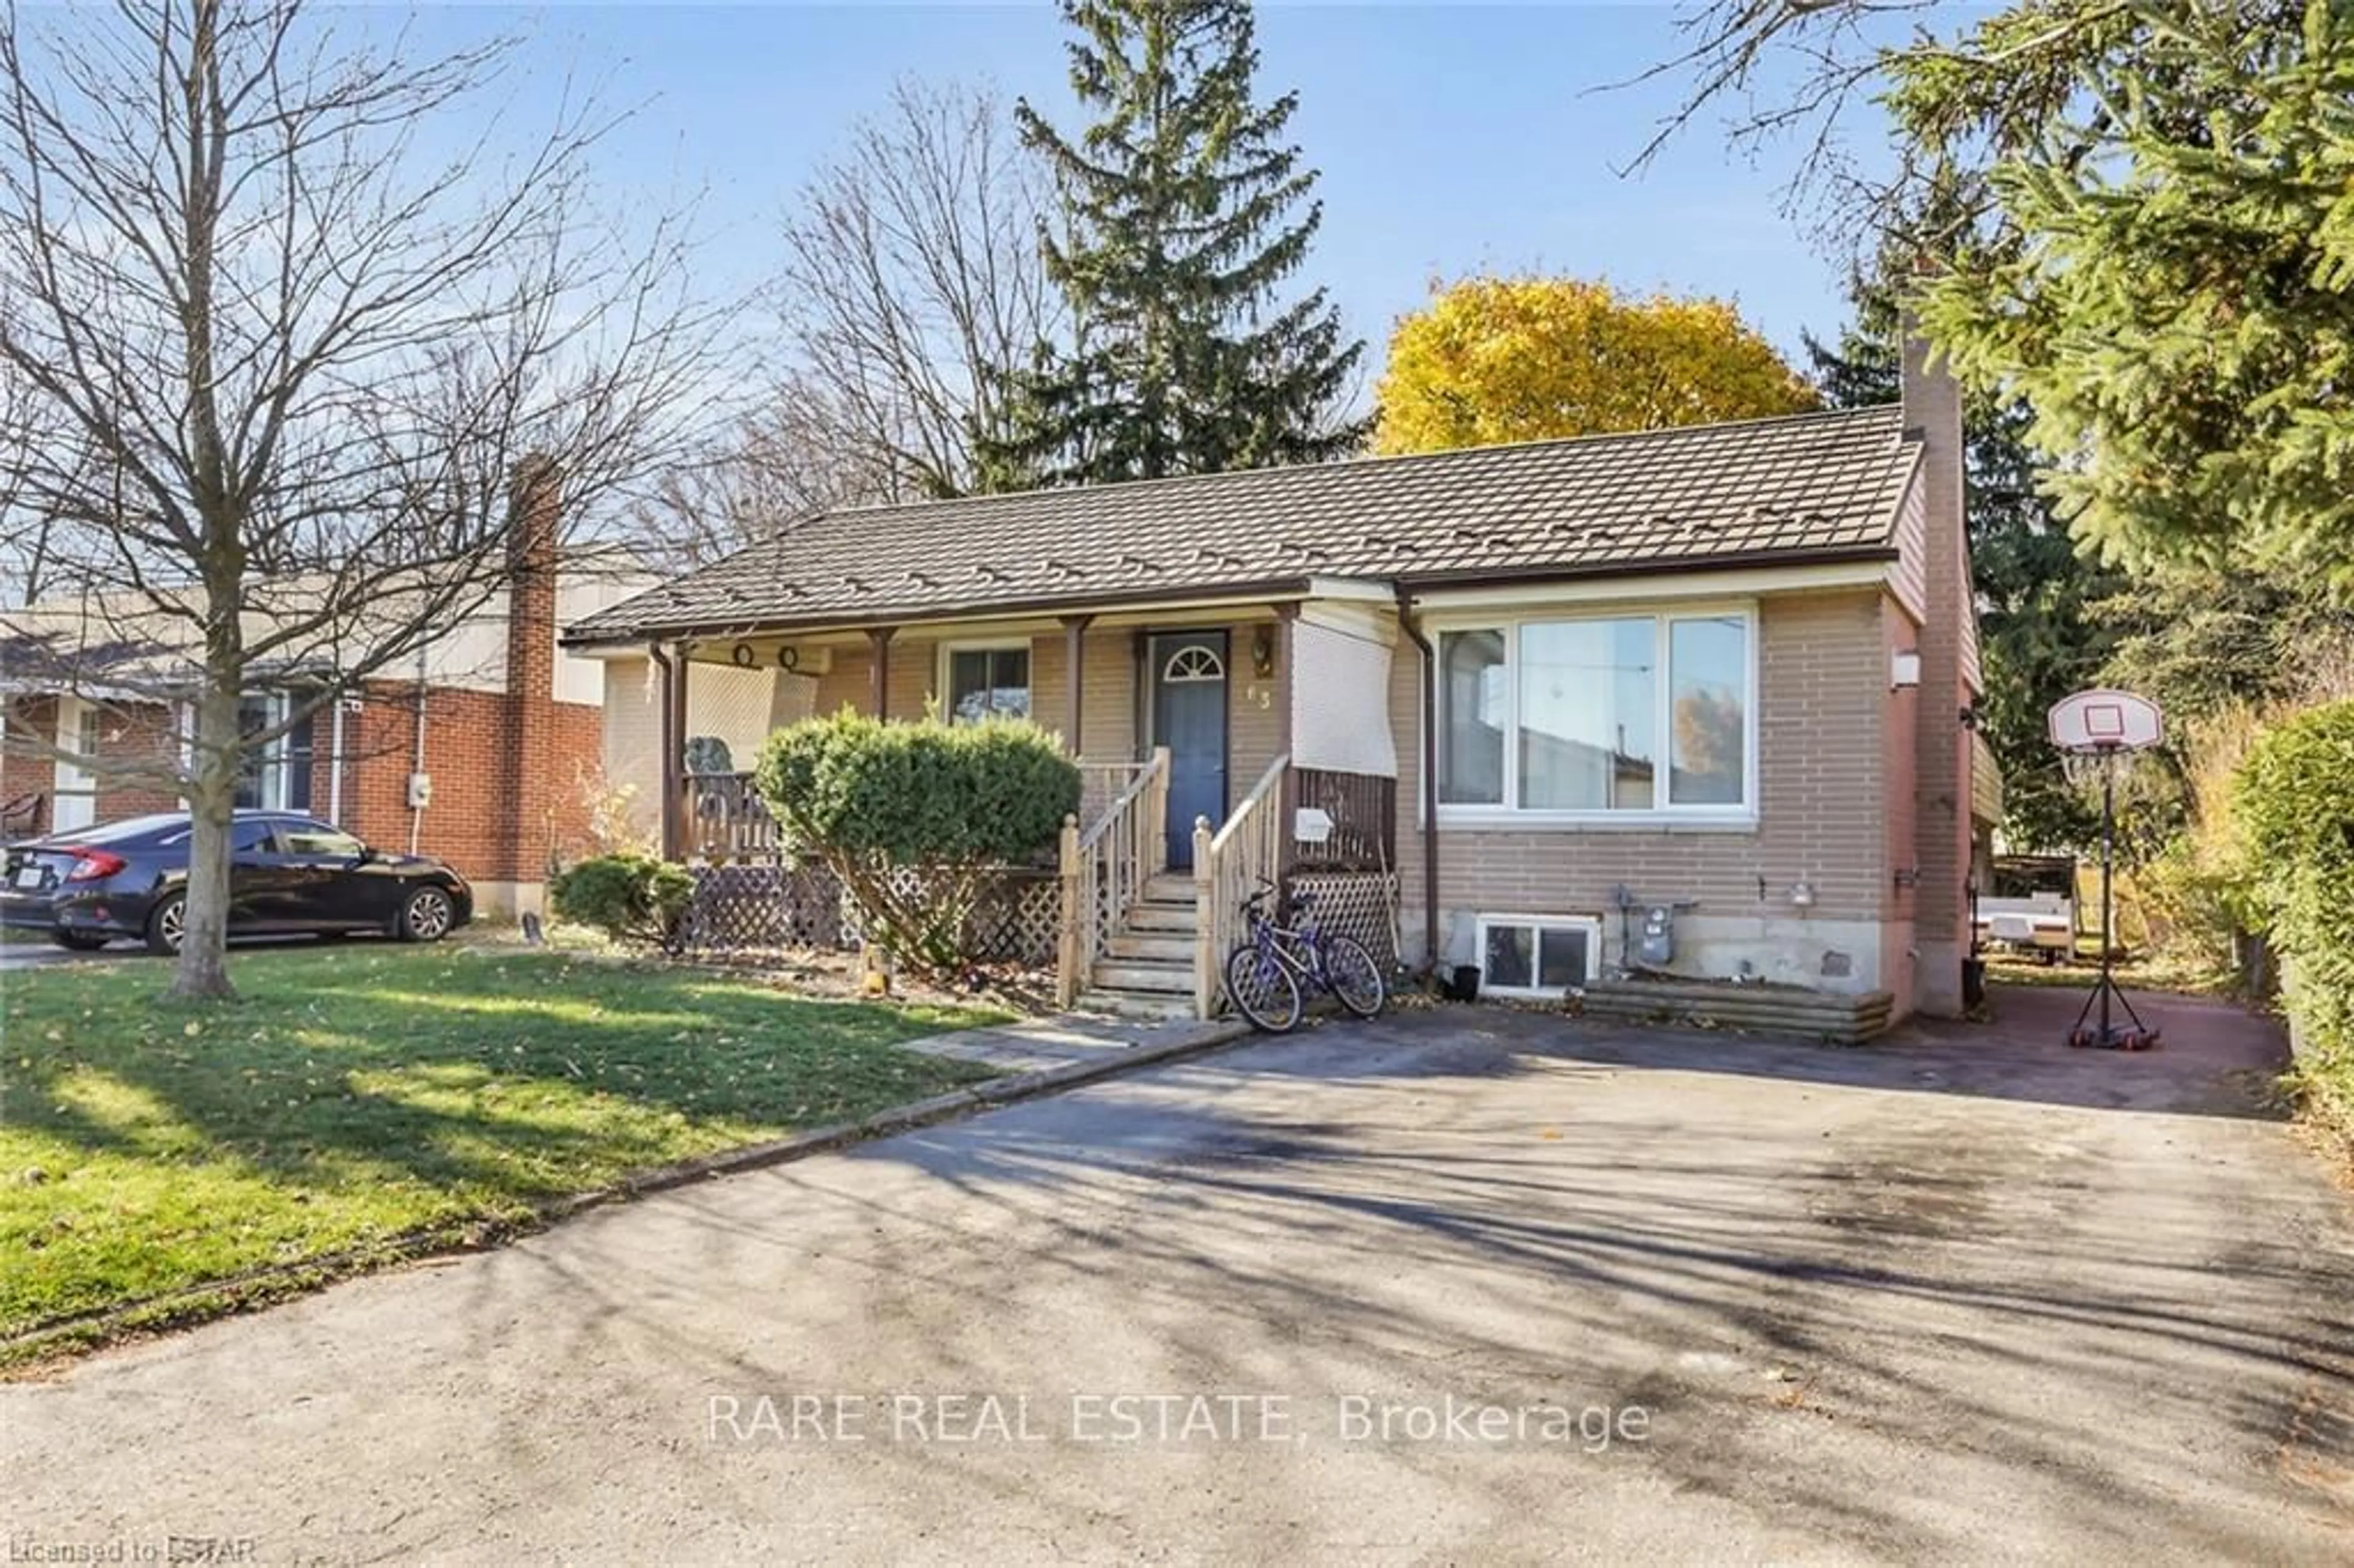 Frontside or backside of a home for 63 Wistow St, London Ontario N5Y 1C9